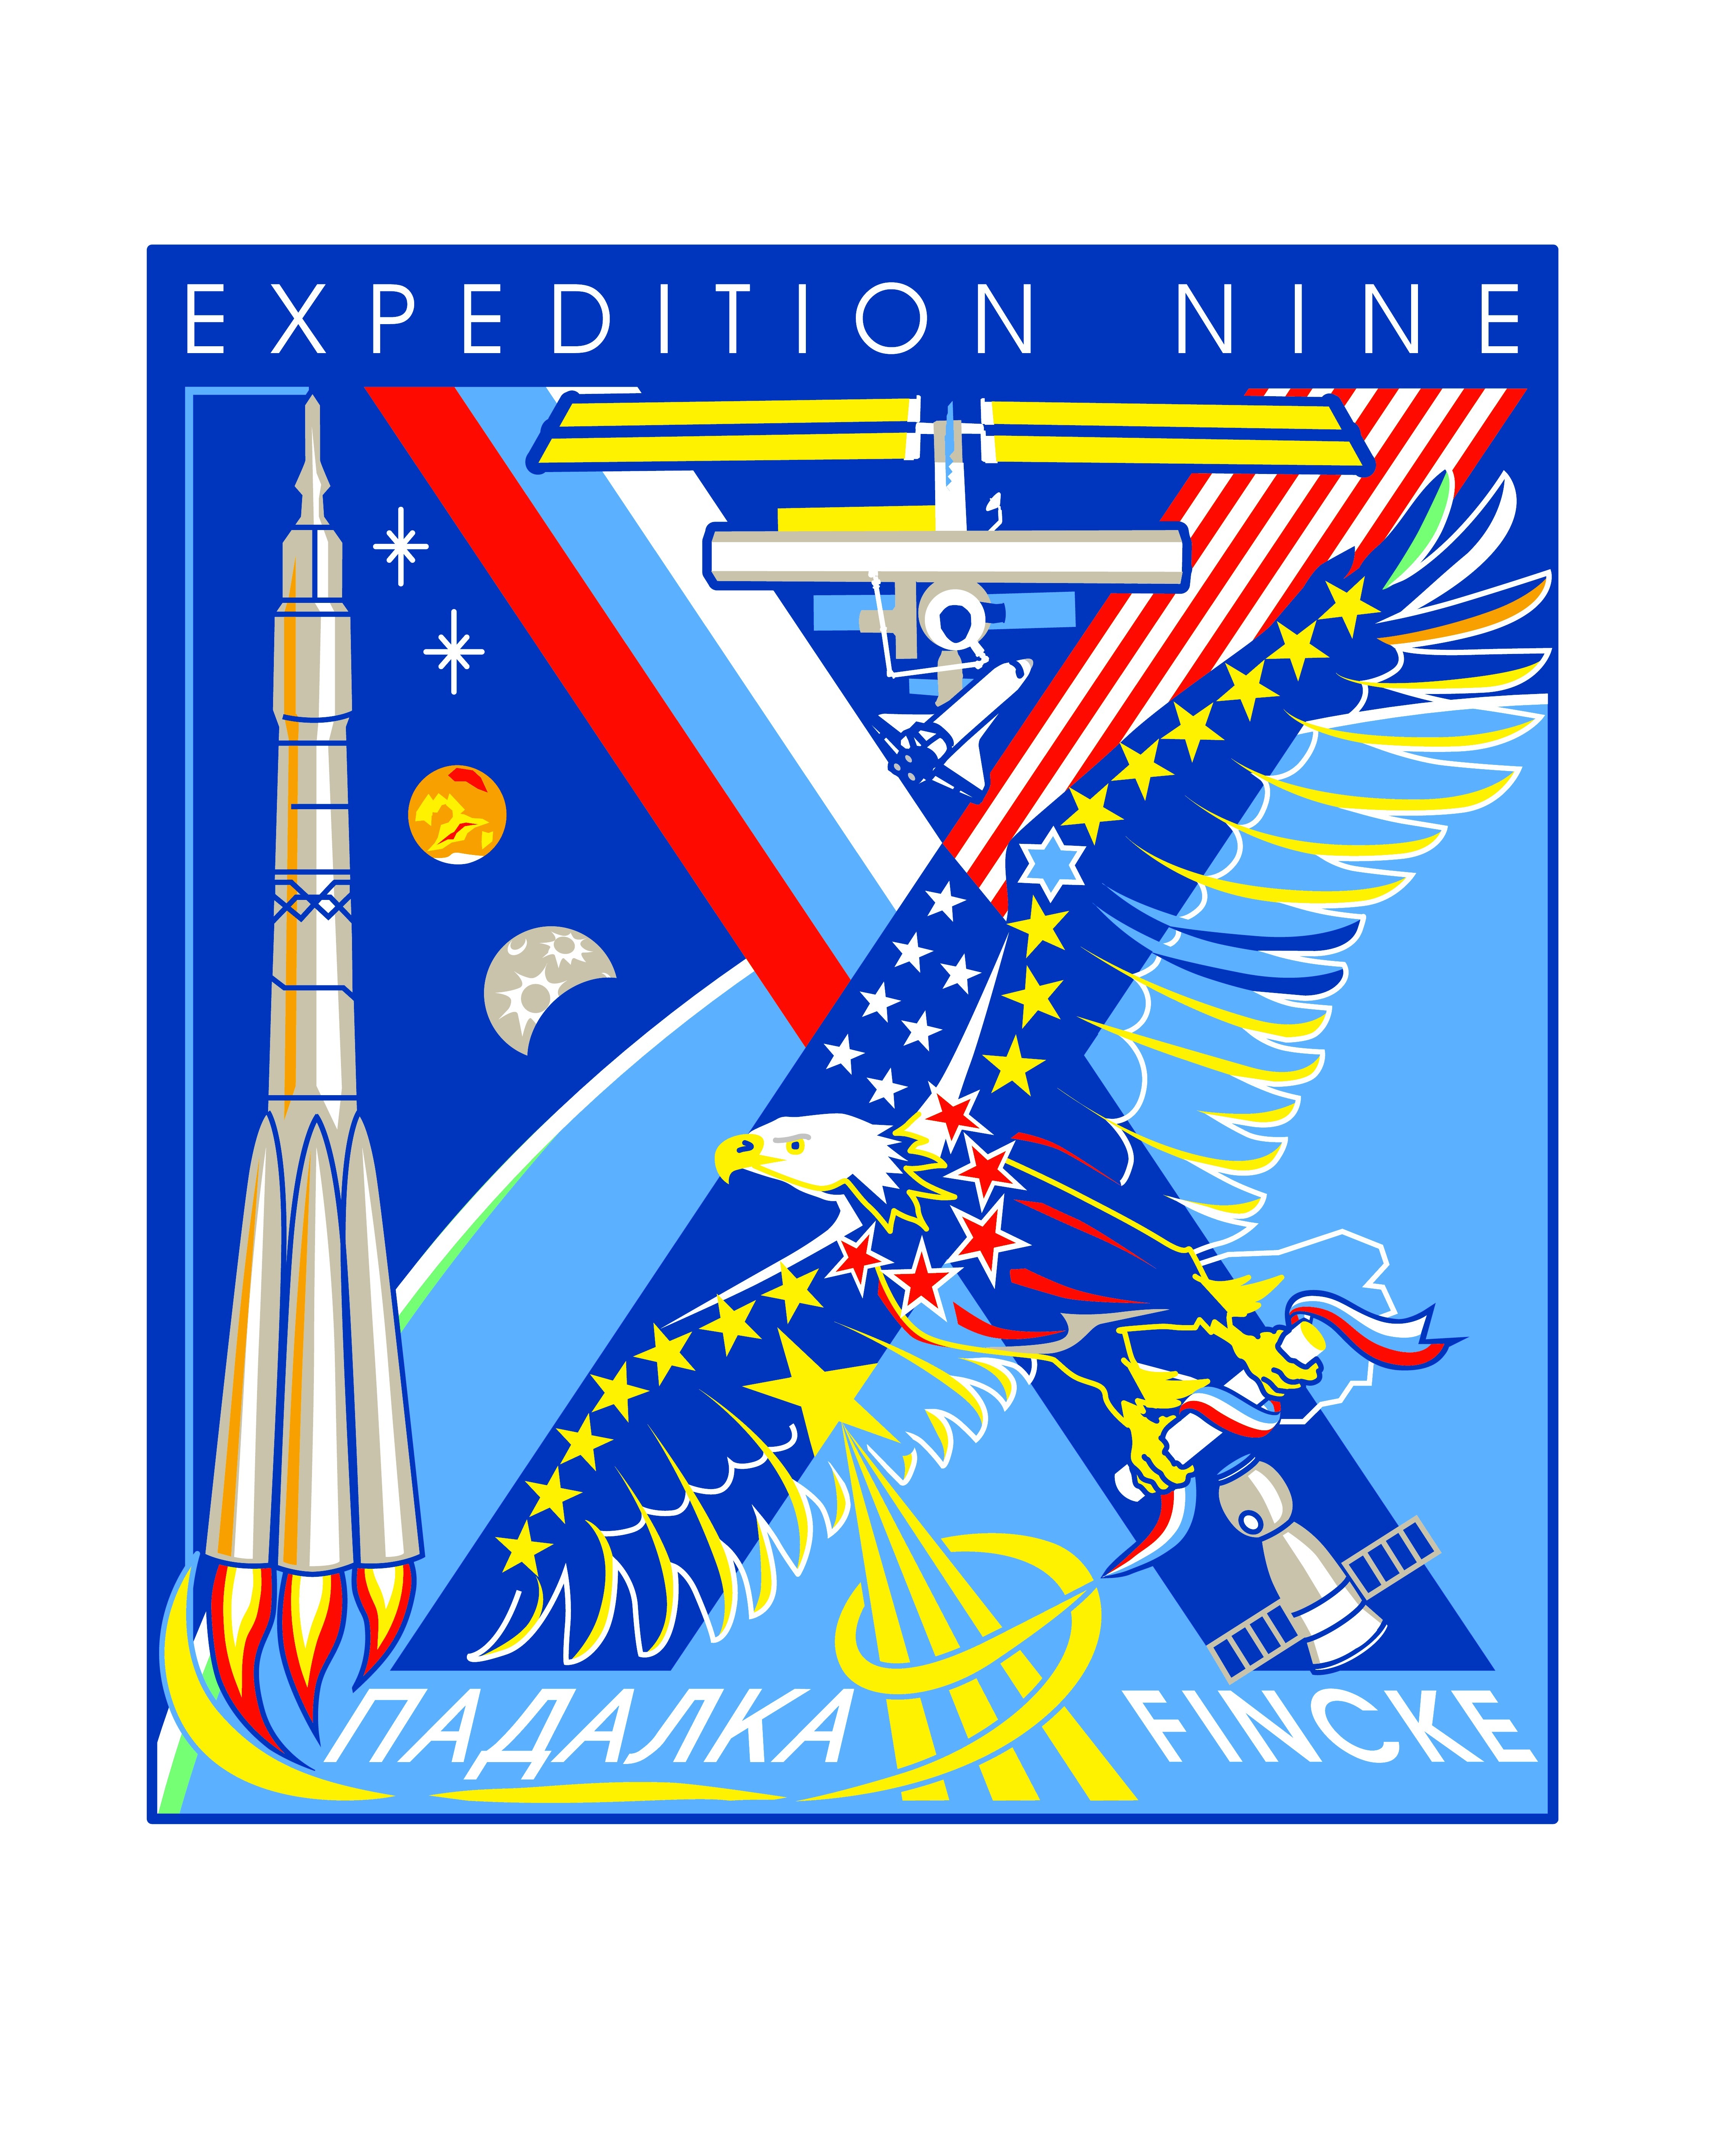 Expedition 9 Official Crew Insignia